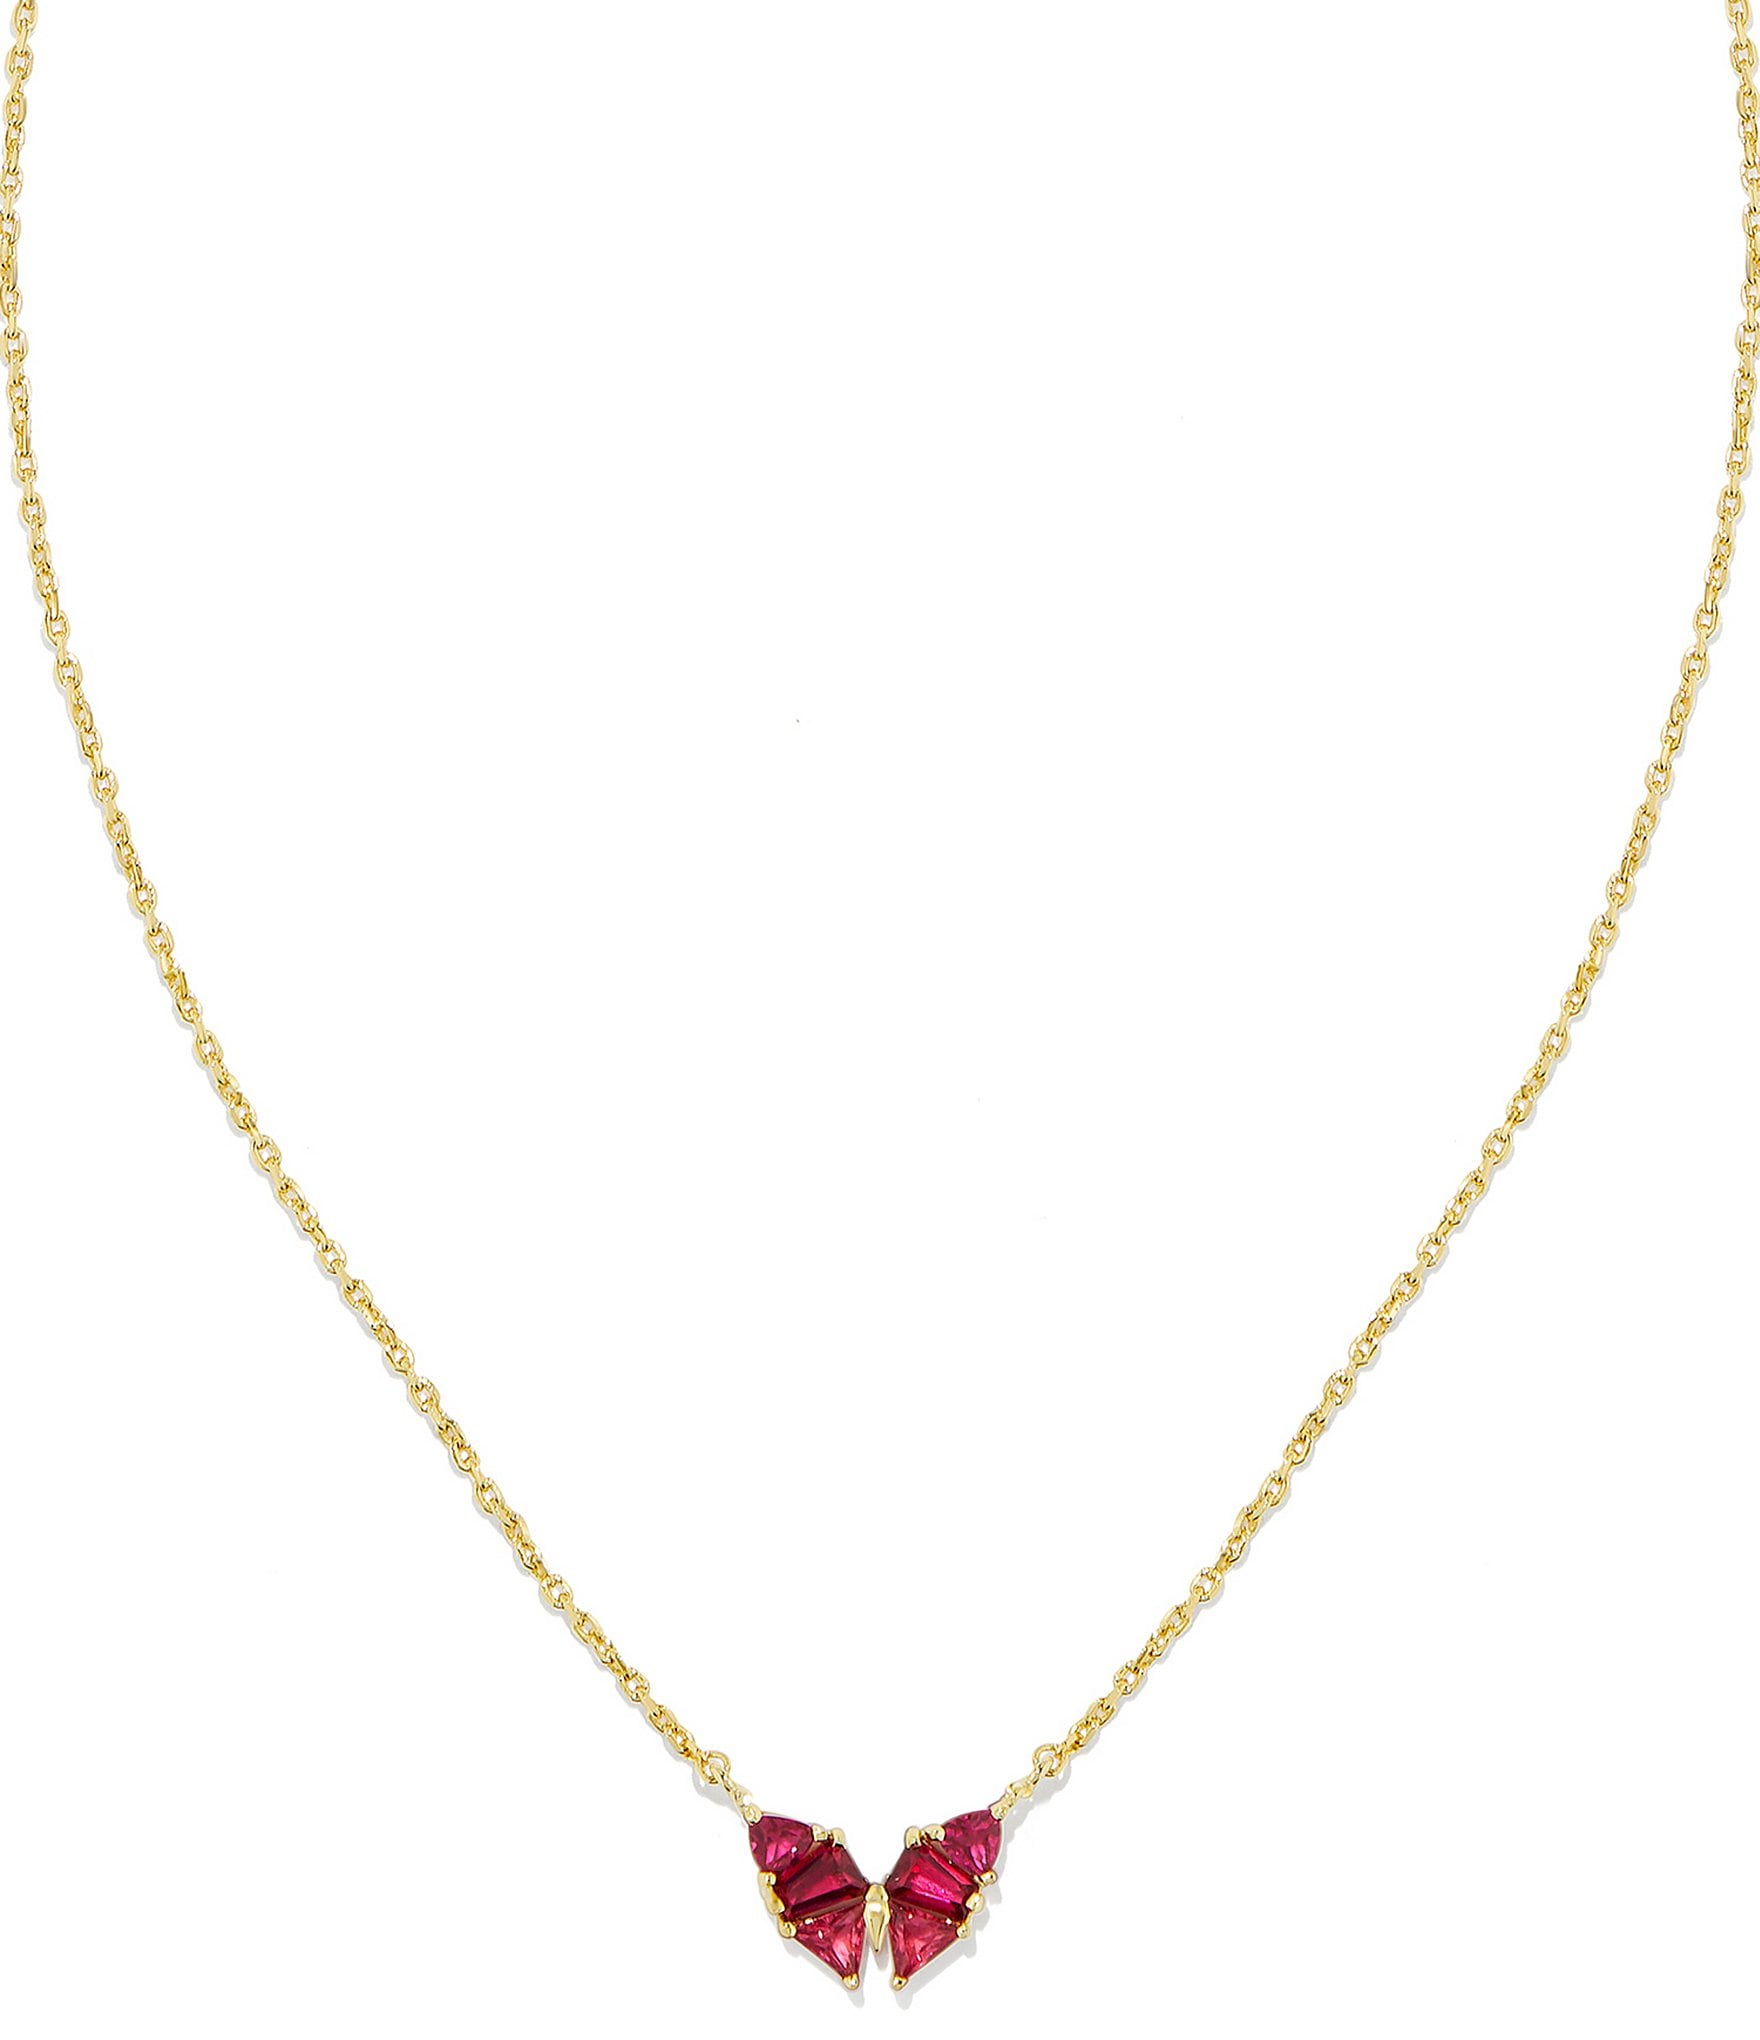 Kendra Scott Lips Pendant Necklace in Gold Bright Pink Opal